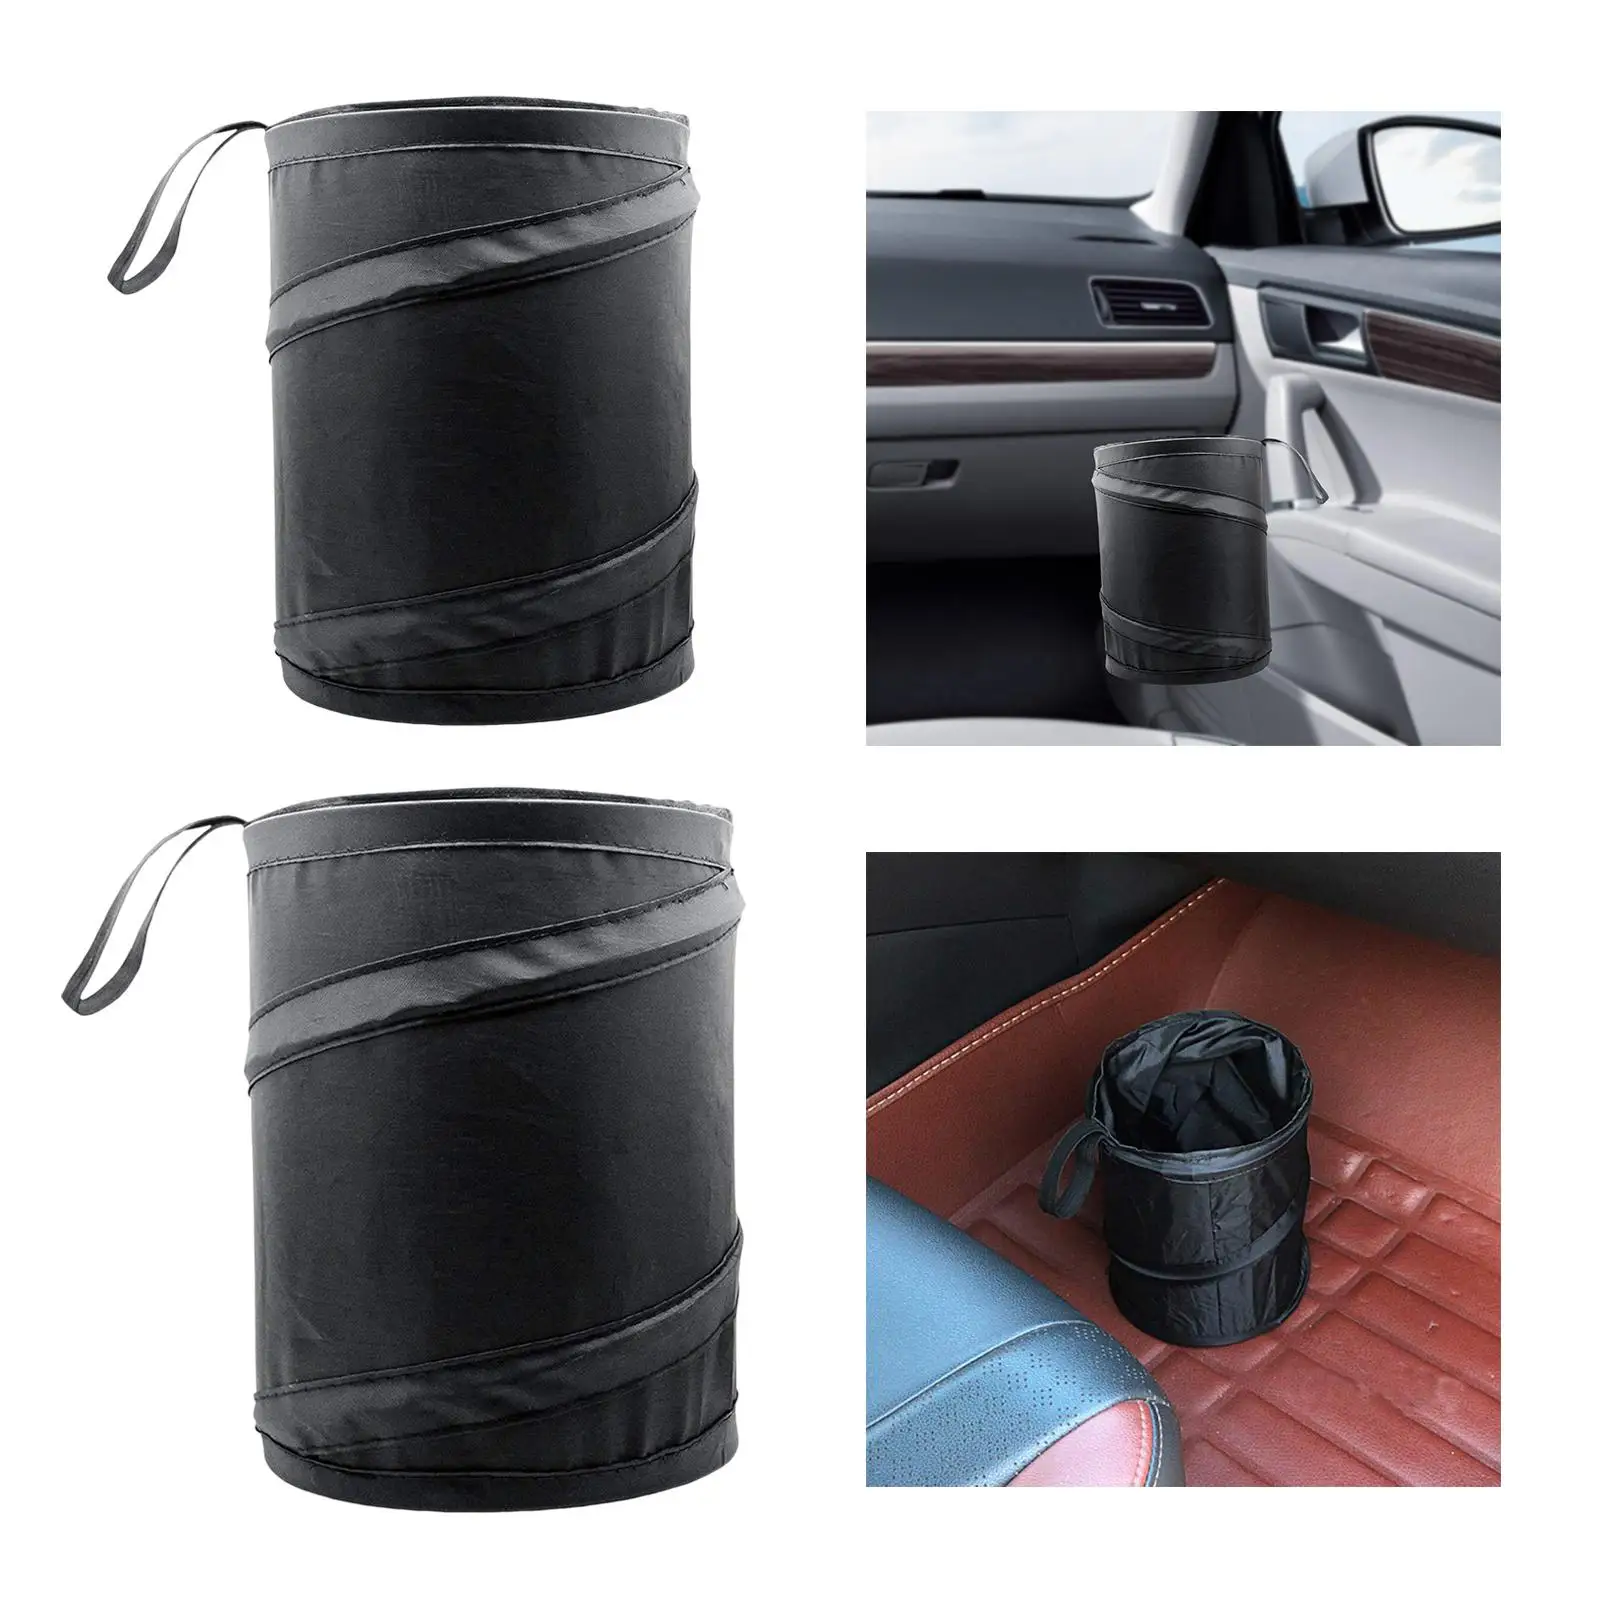 Portable Car Trash Can Storage Bag Dustbin for SUV Camping Living Room